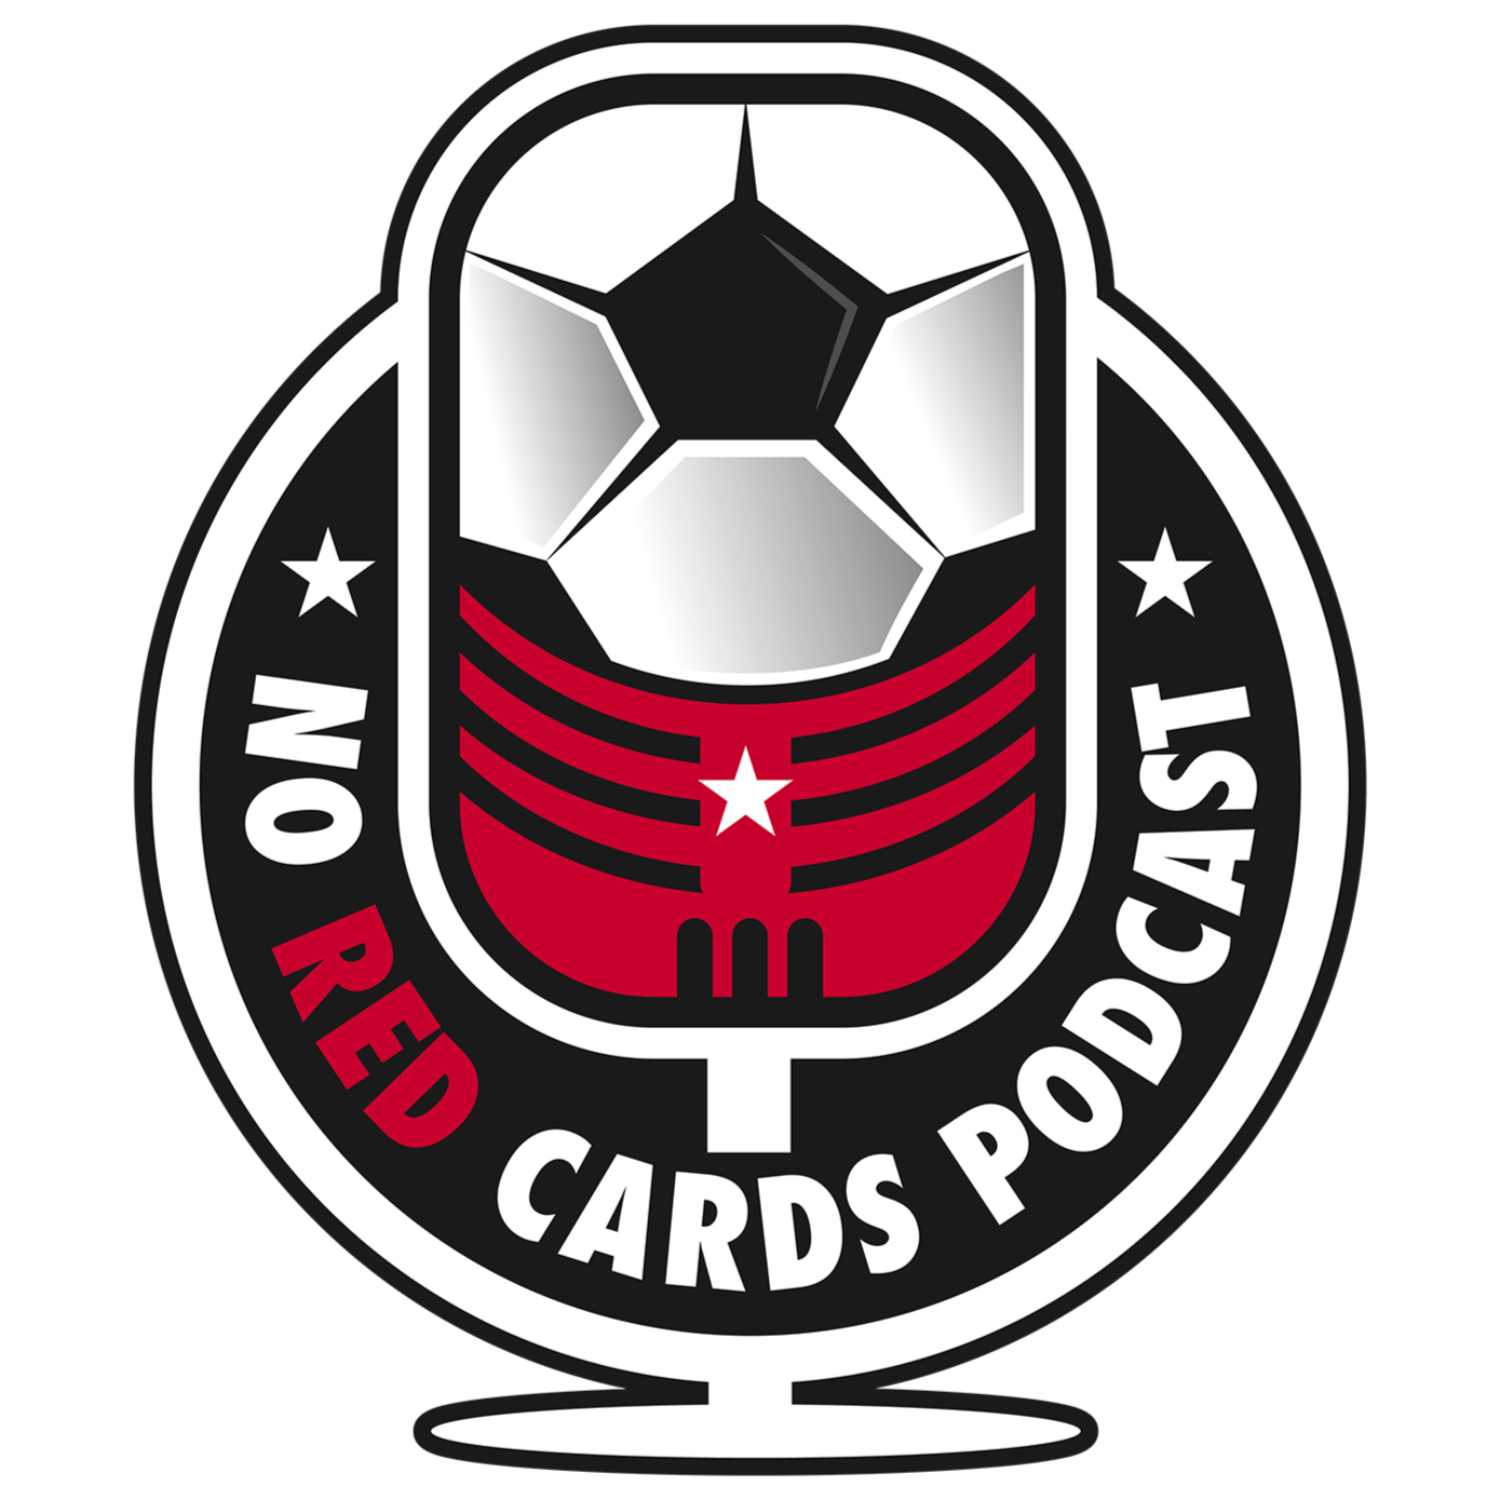 No Red Cards Podcast